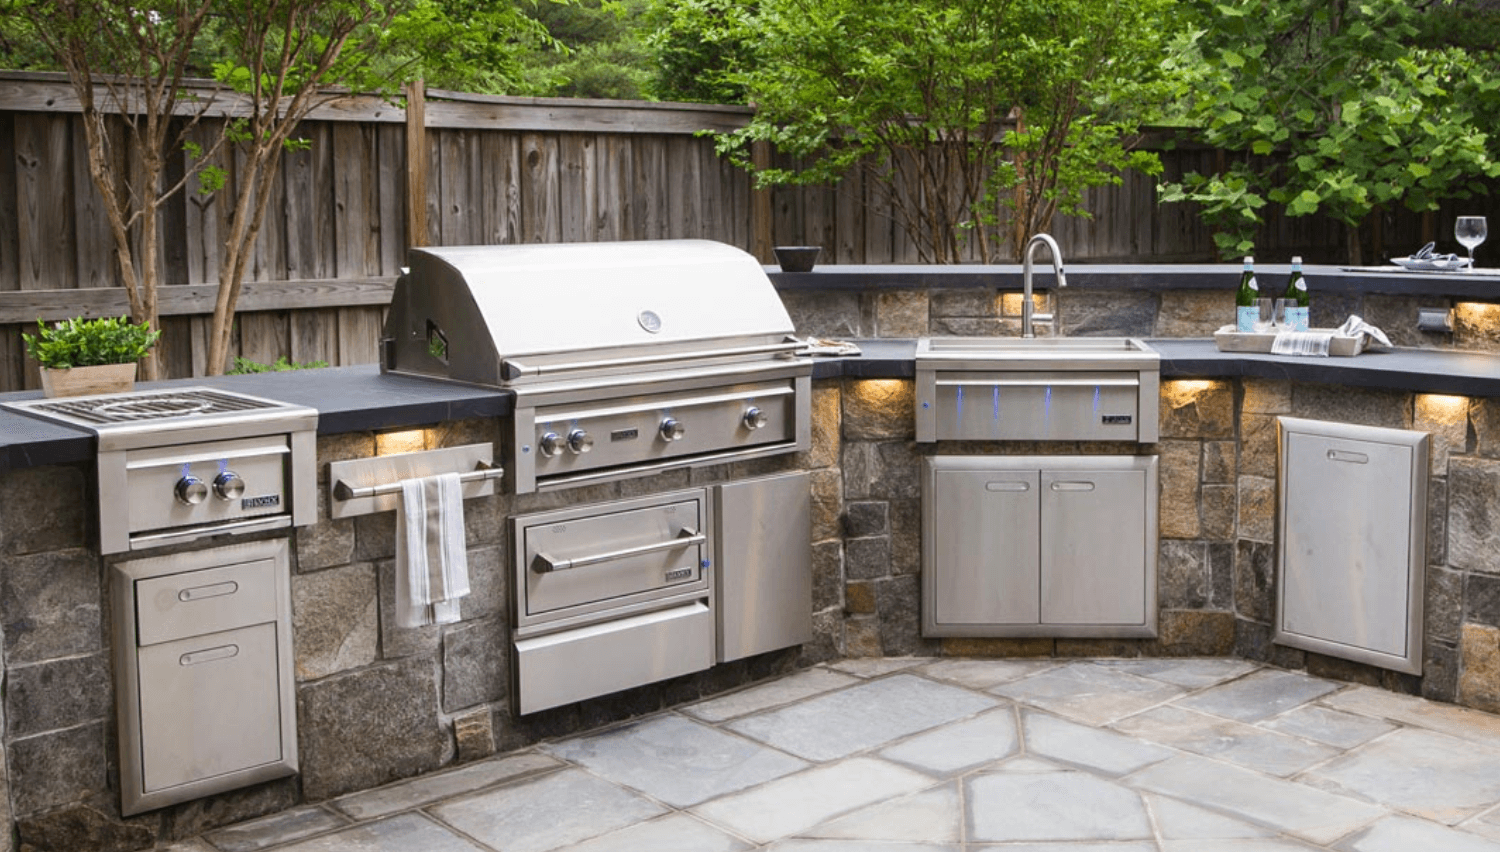 Are Lynx Grills Worth The Money?